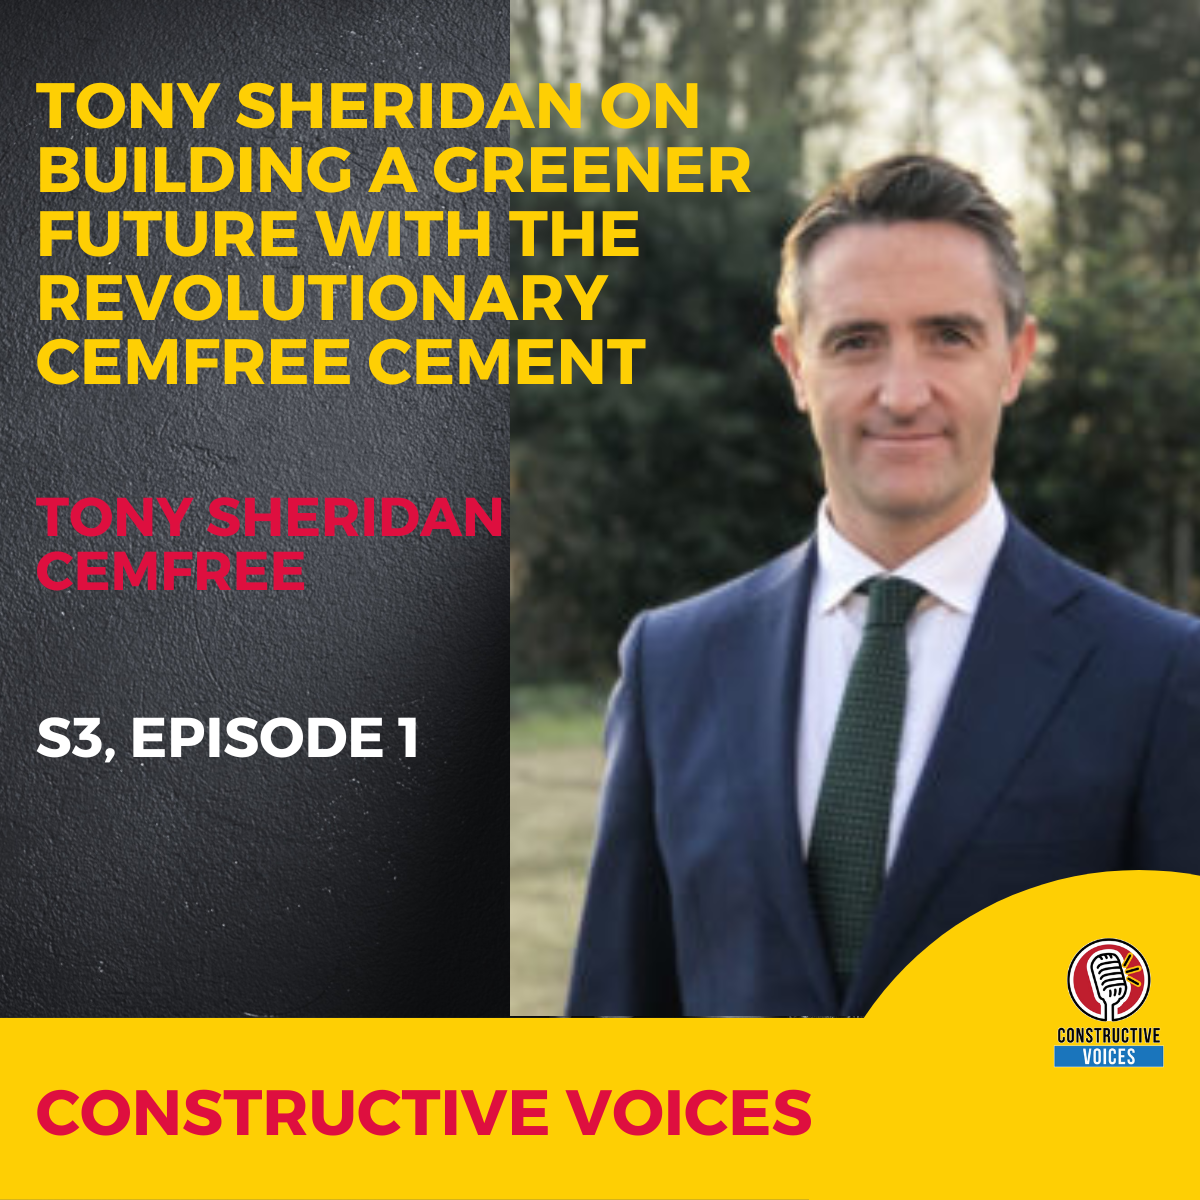 Tony Sheridan on Building a Greener Future with the Revolutionary Cemfree Cement